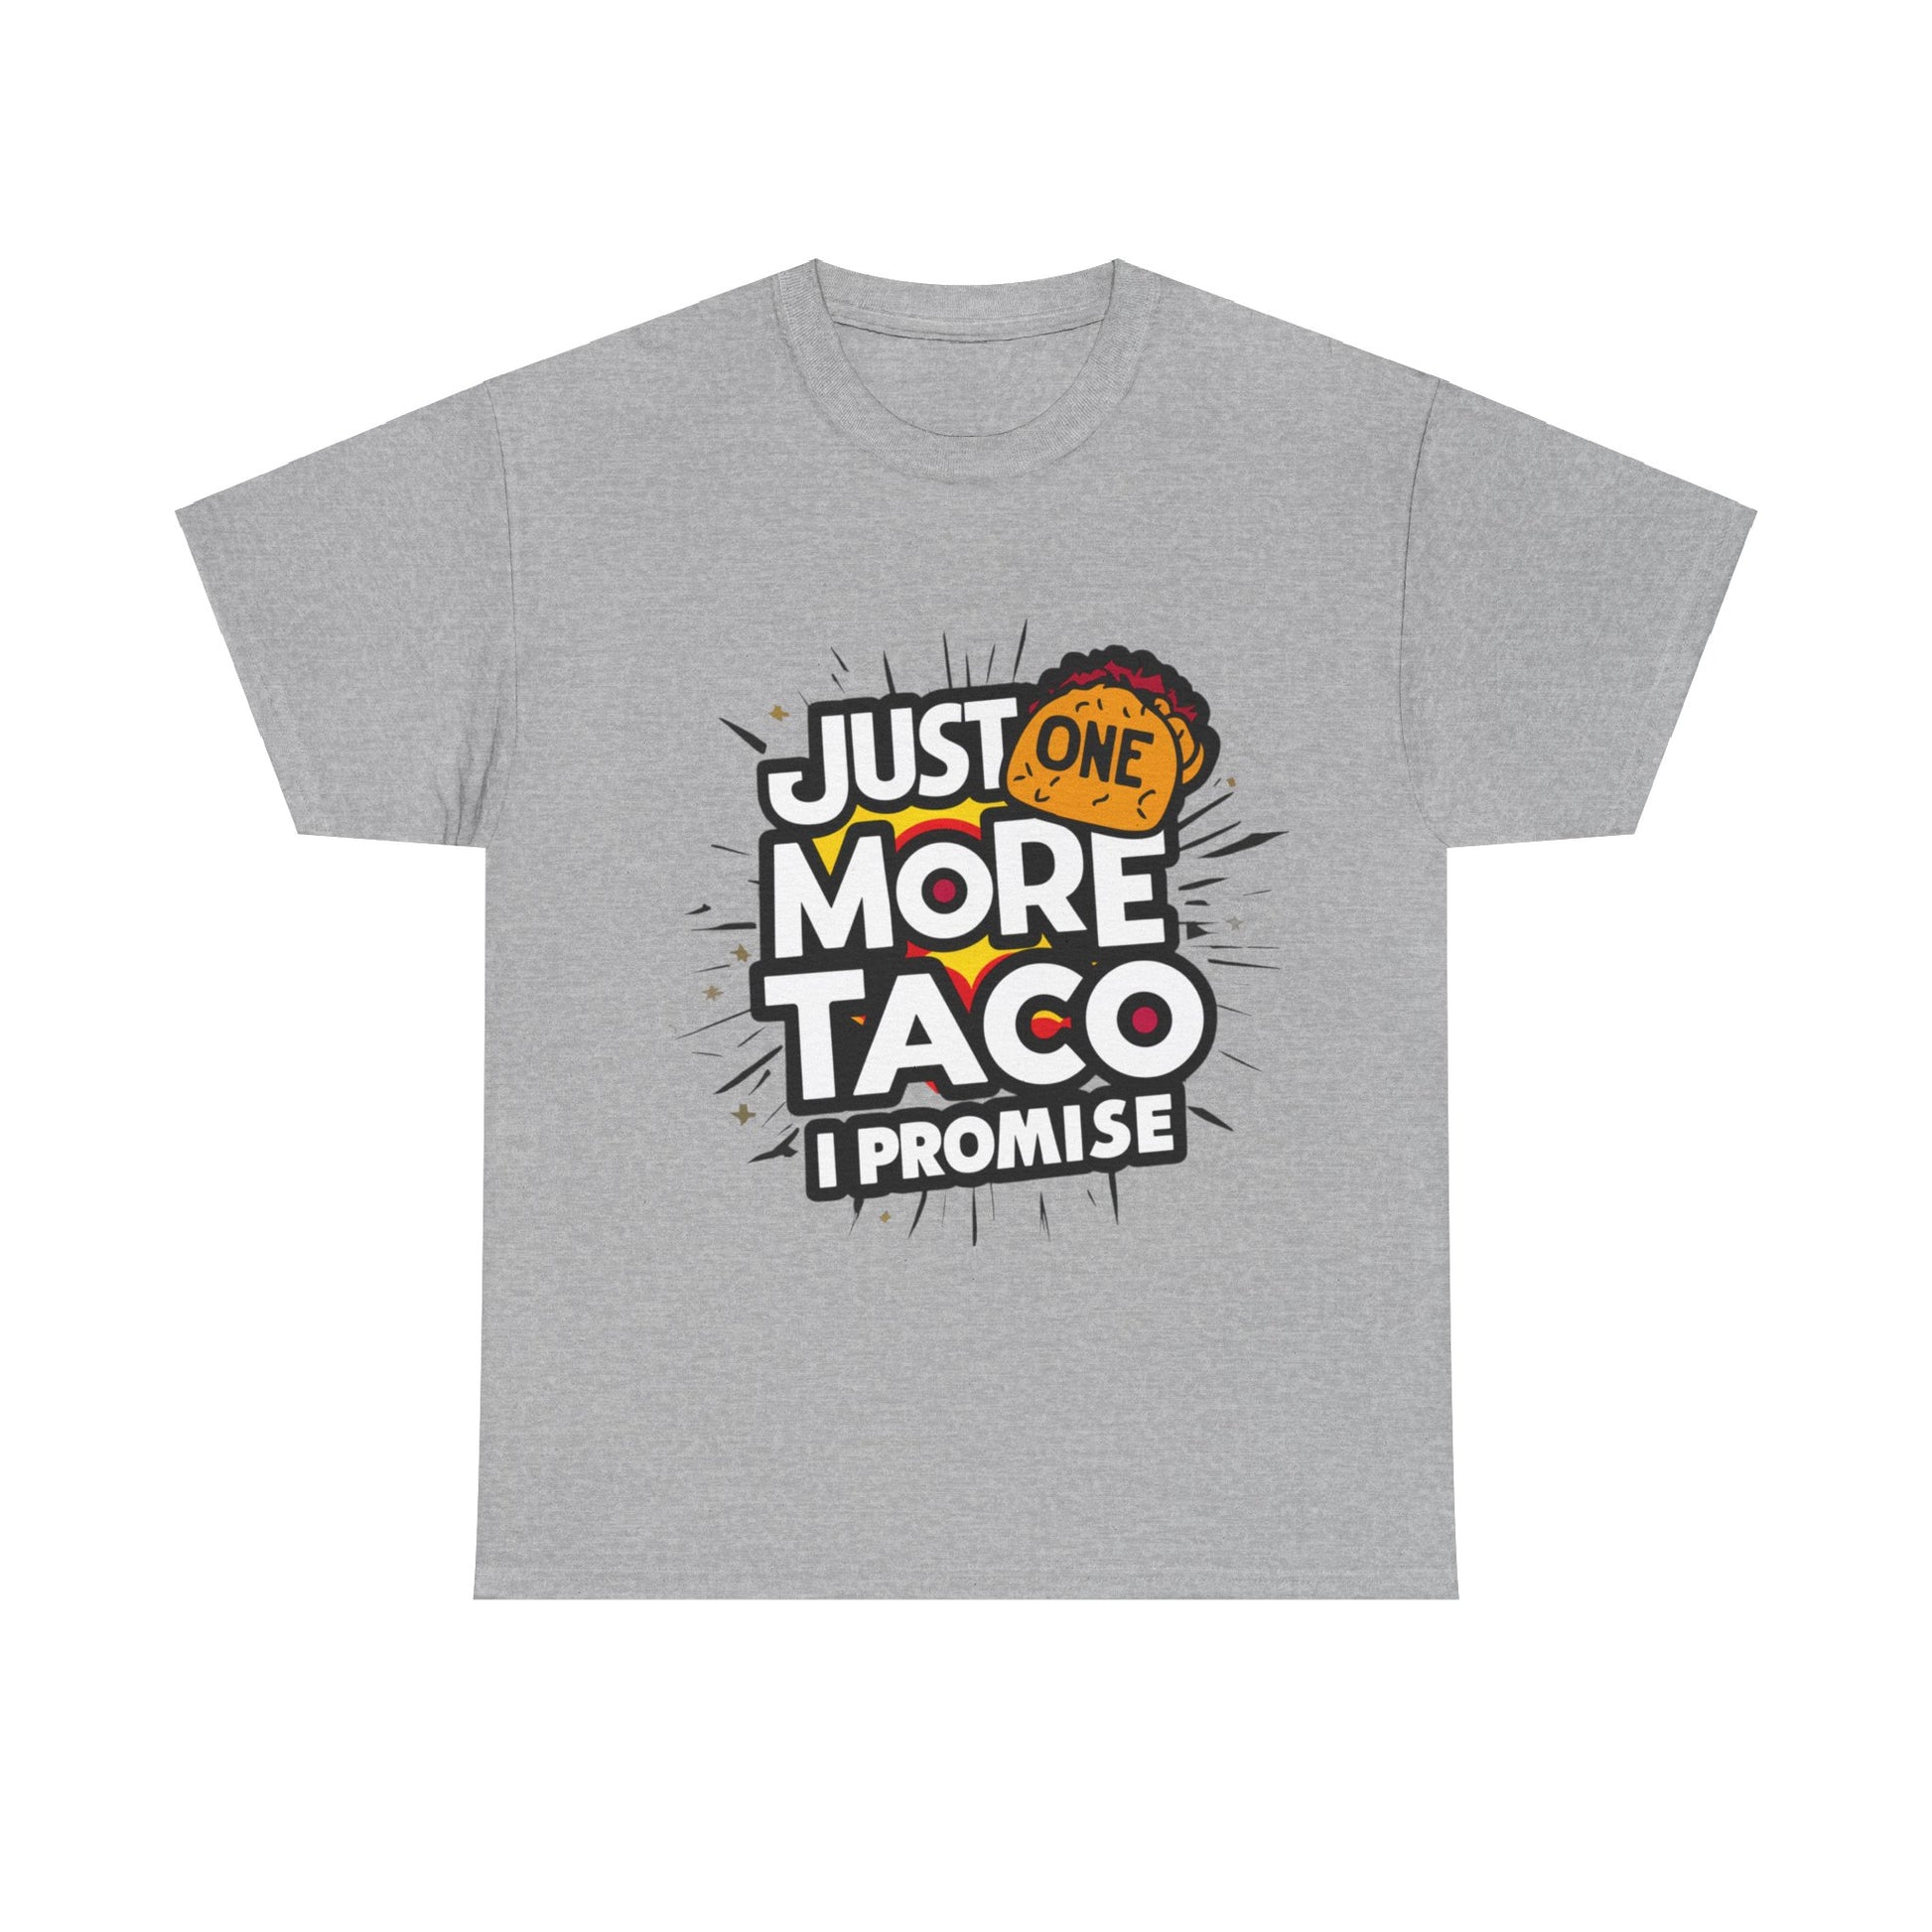 Copy of Just One More Taco I Promise Mexican Food Graphic Unisex Heavy Cotton Tee Cotton Funny Humorous Graphic Soft Premium Unisex Men Women Sport Grey T-shirt Birthday Gift-9